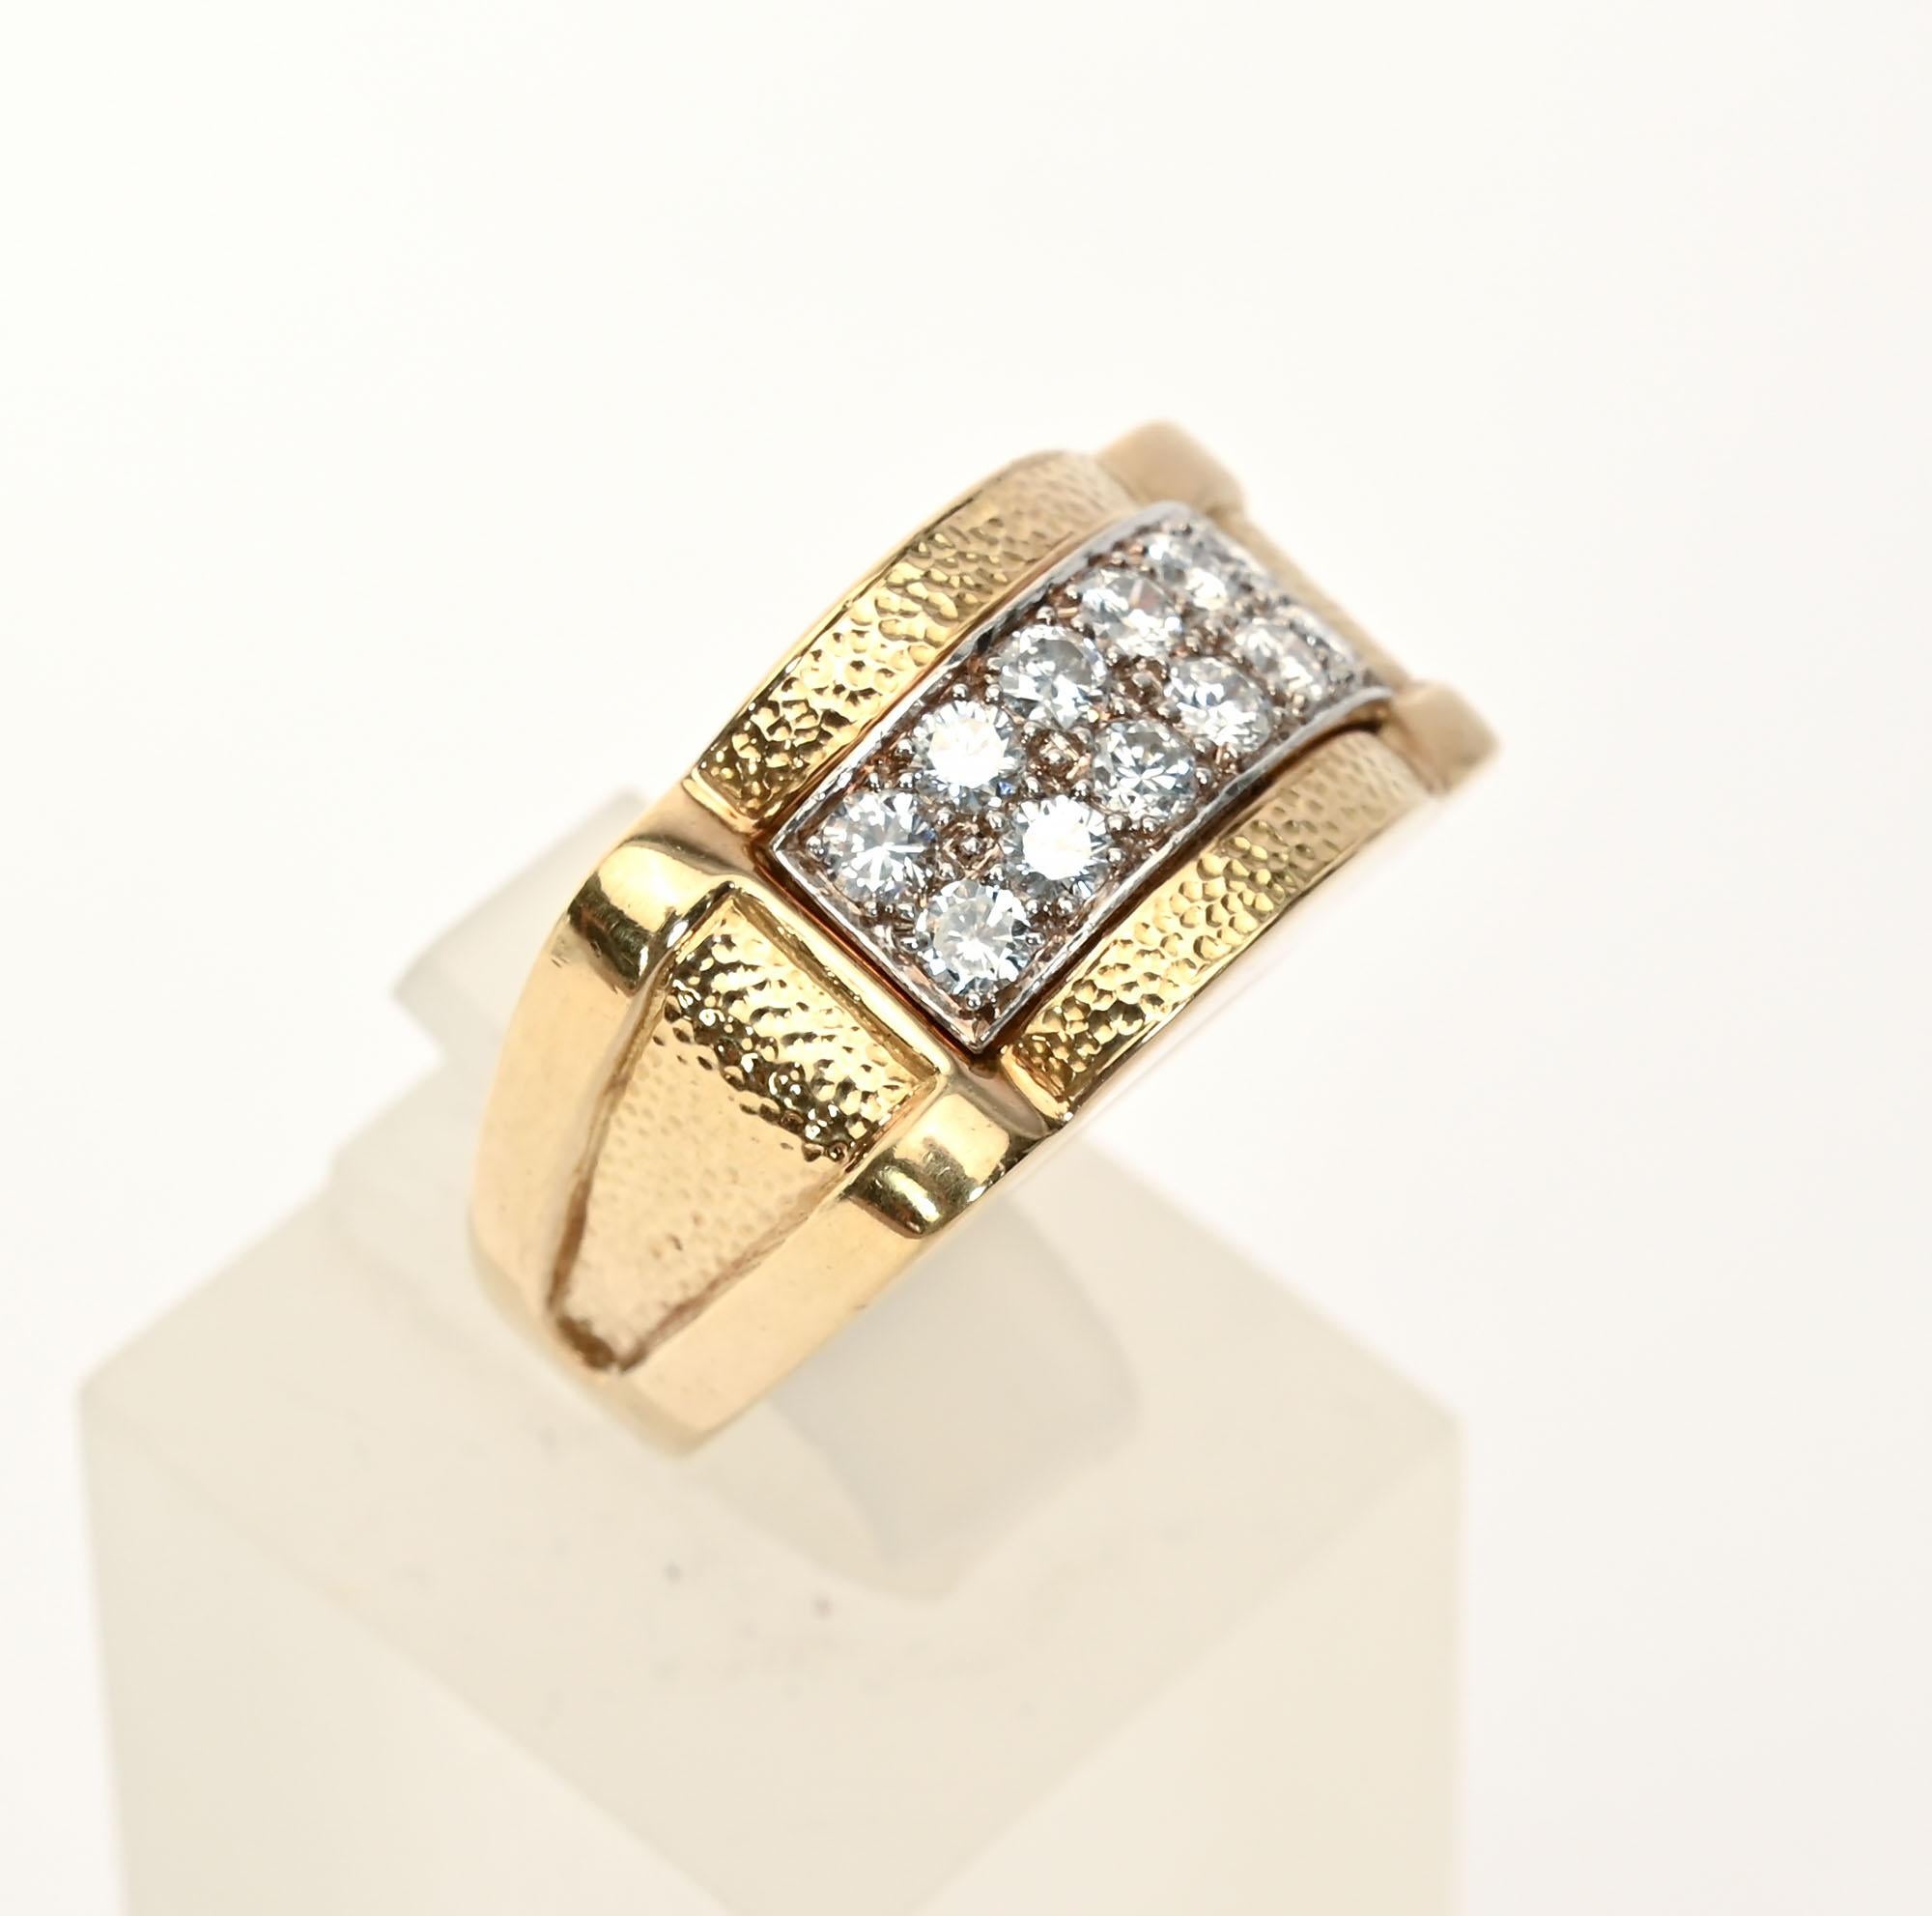 David Webb 18 karat gold ring with 12 diamonds set in platinum. Hammered surfaces on top and sides with smooth finish front and back. Size 6 1/4 but can be sized up or down. Can be worn equally well by a man or woman. It measures 7/8